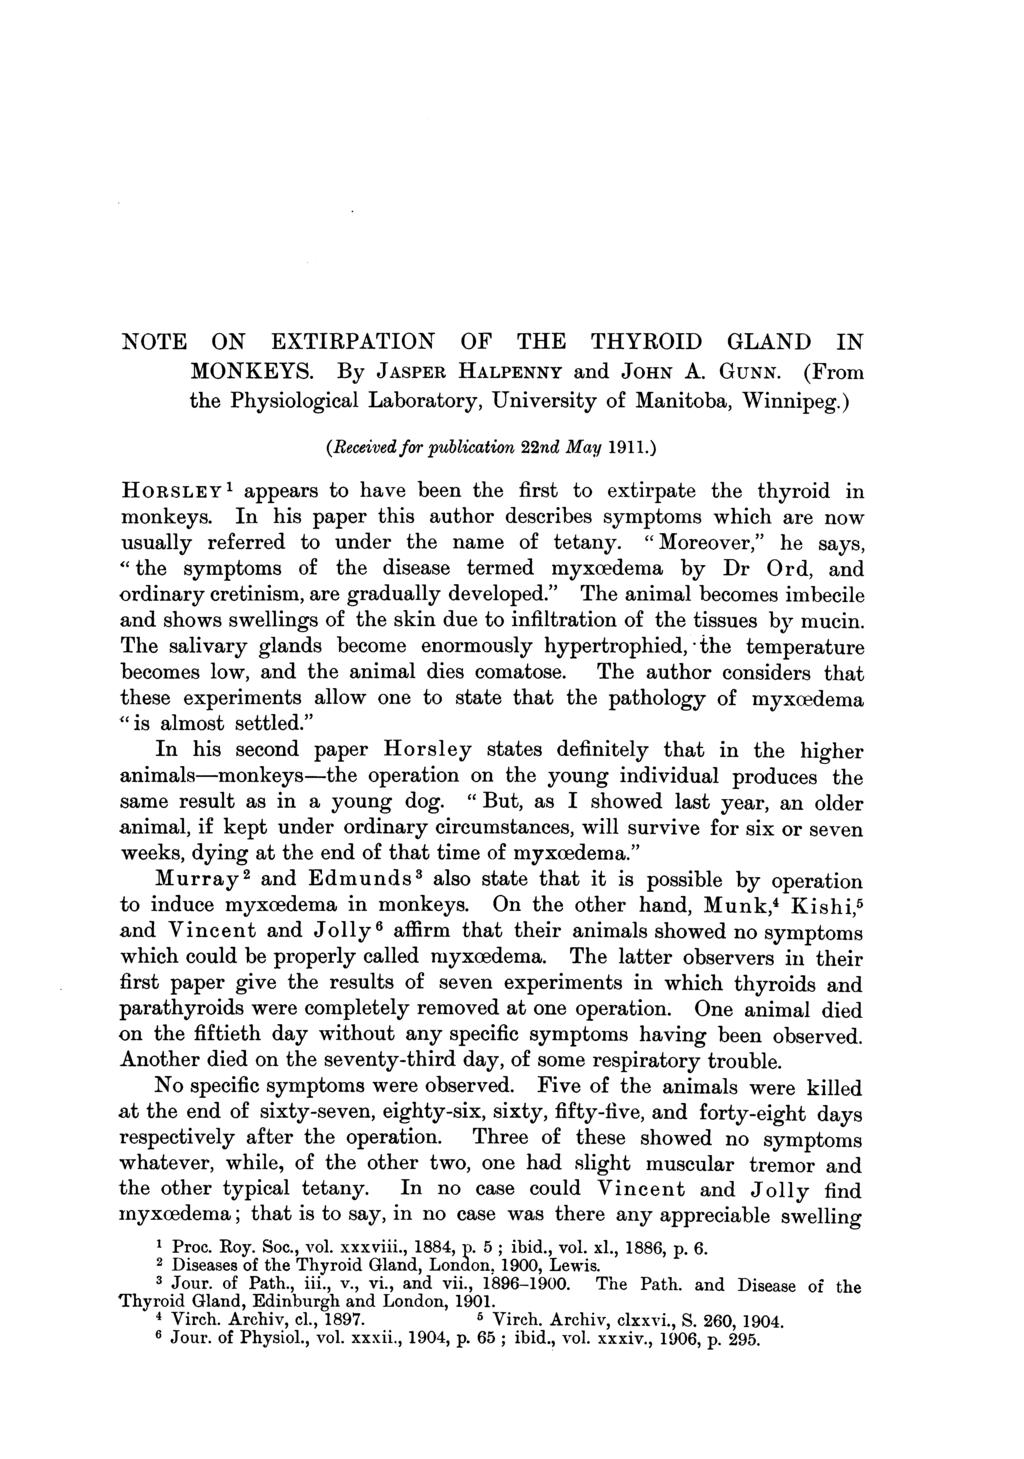 NOTE ON EXTIRPATION OF THE THYROID GLAND IN MONKEYS. By JASPER HALPENNY and JOHN A. GUNN. (From the Physiological Laboratory, University of Manitoba, Winnipeg.